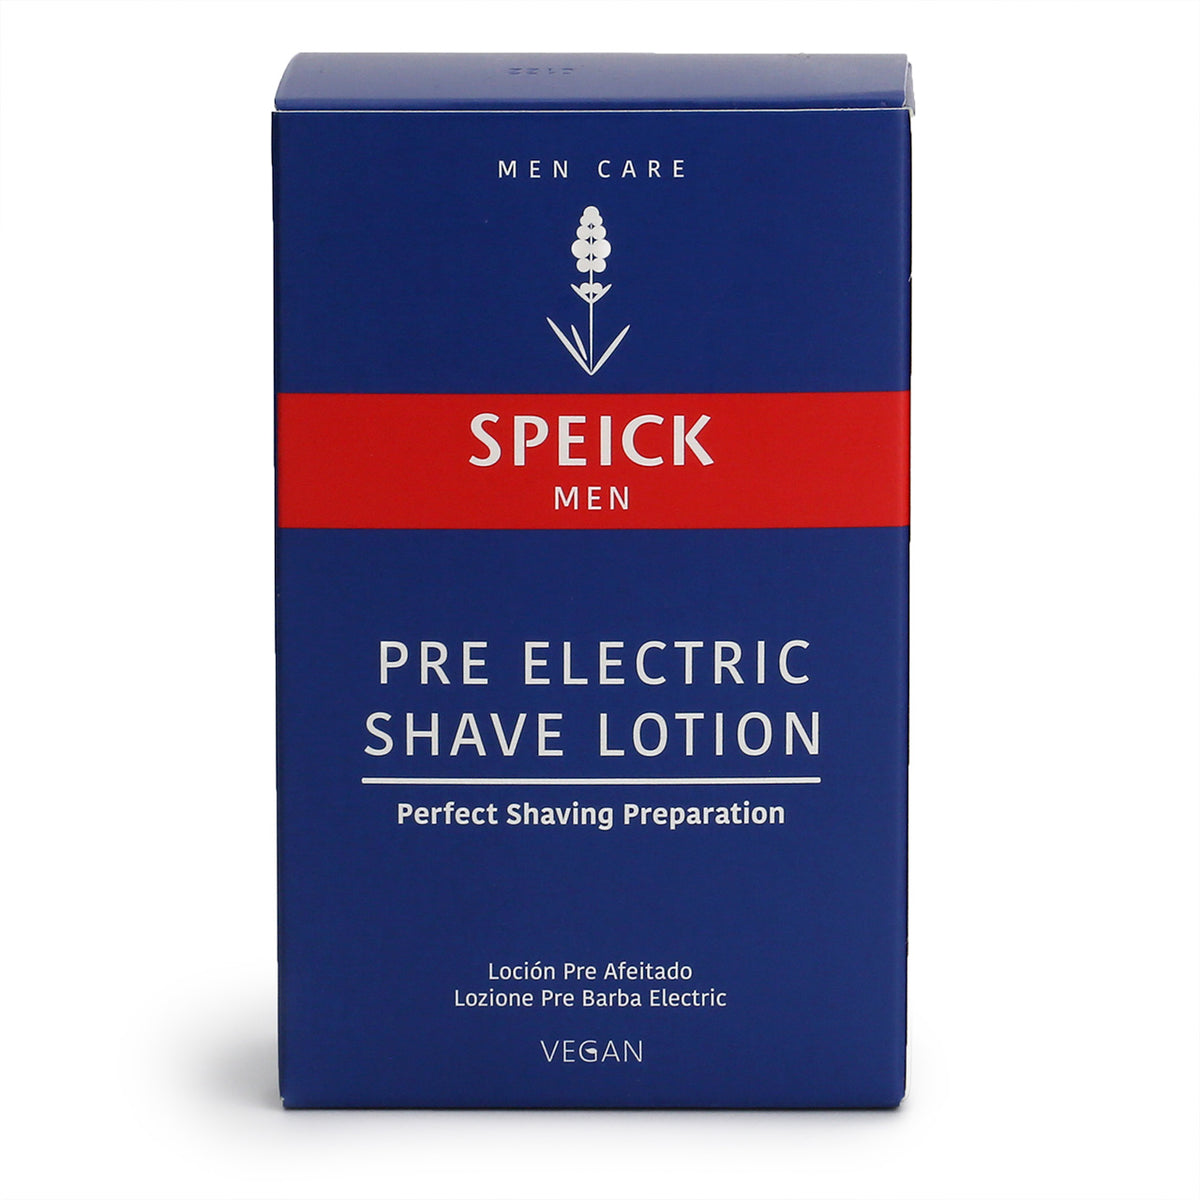 Speick Men Pre-Electric Shave Lotion outer packaging is blue and red with white text and logo